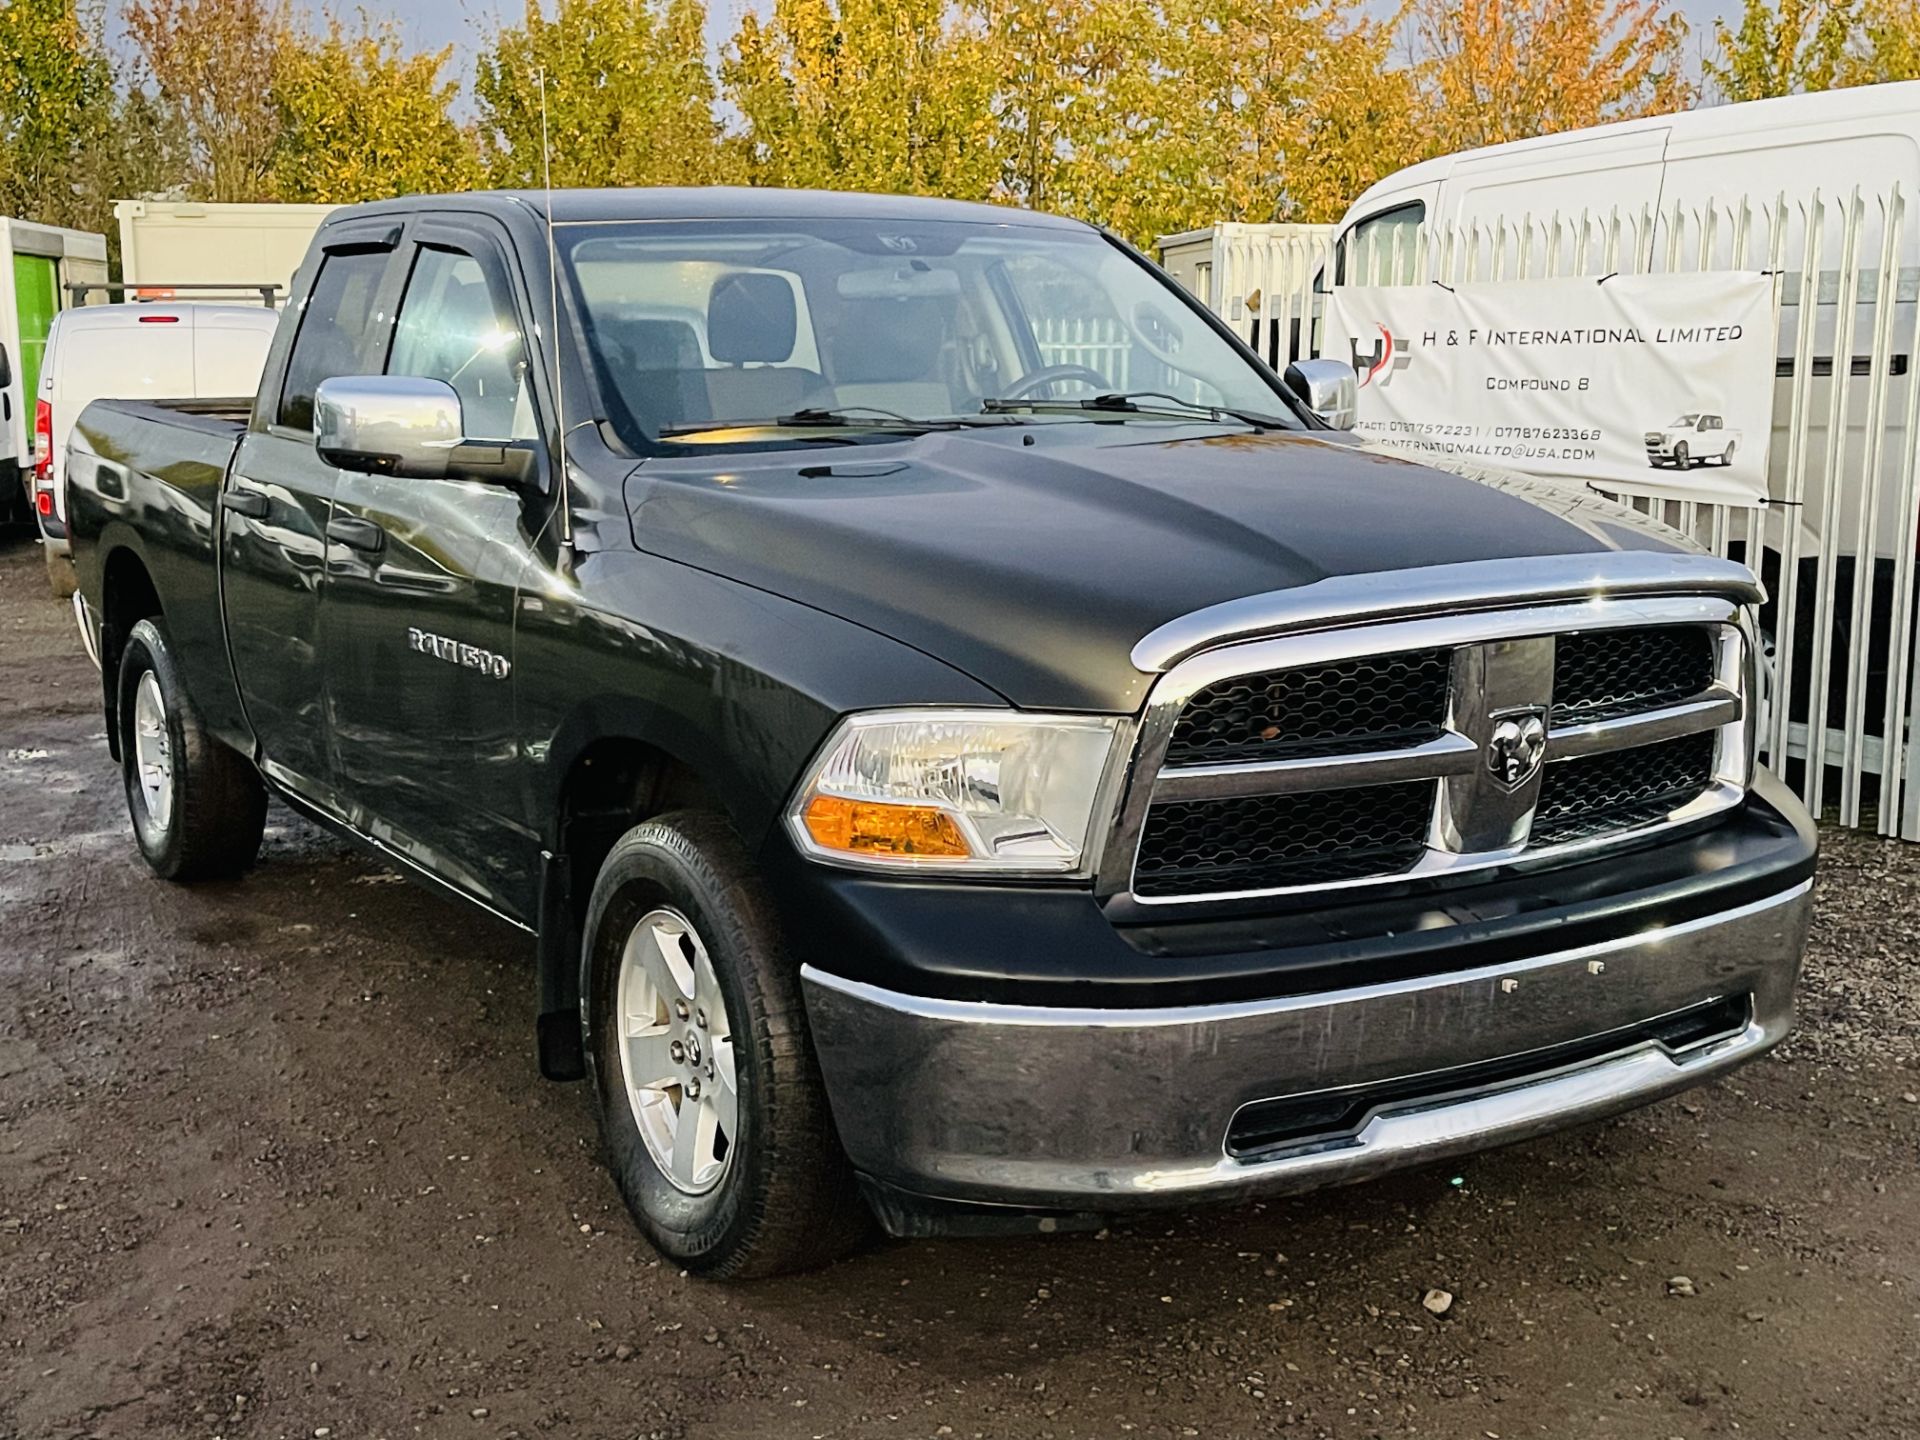 ** ON SALE **Dodge Ram 4.7 V8 1500 ST 4WD ' 2012 Year ' A/C - Cruise Control - 6 Seats Chrome Pack - Image 4 of 27